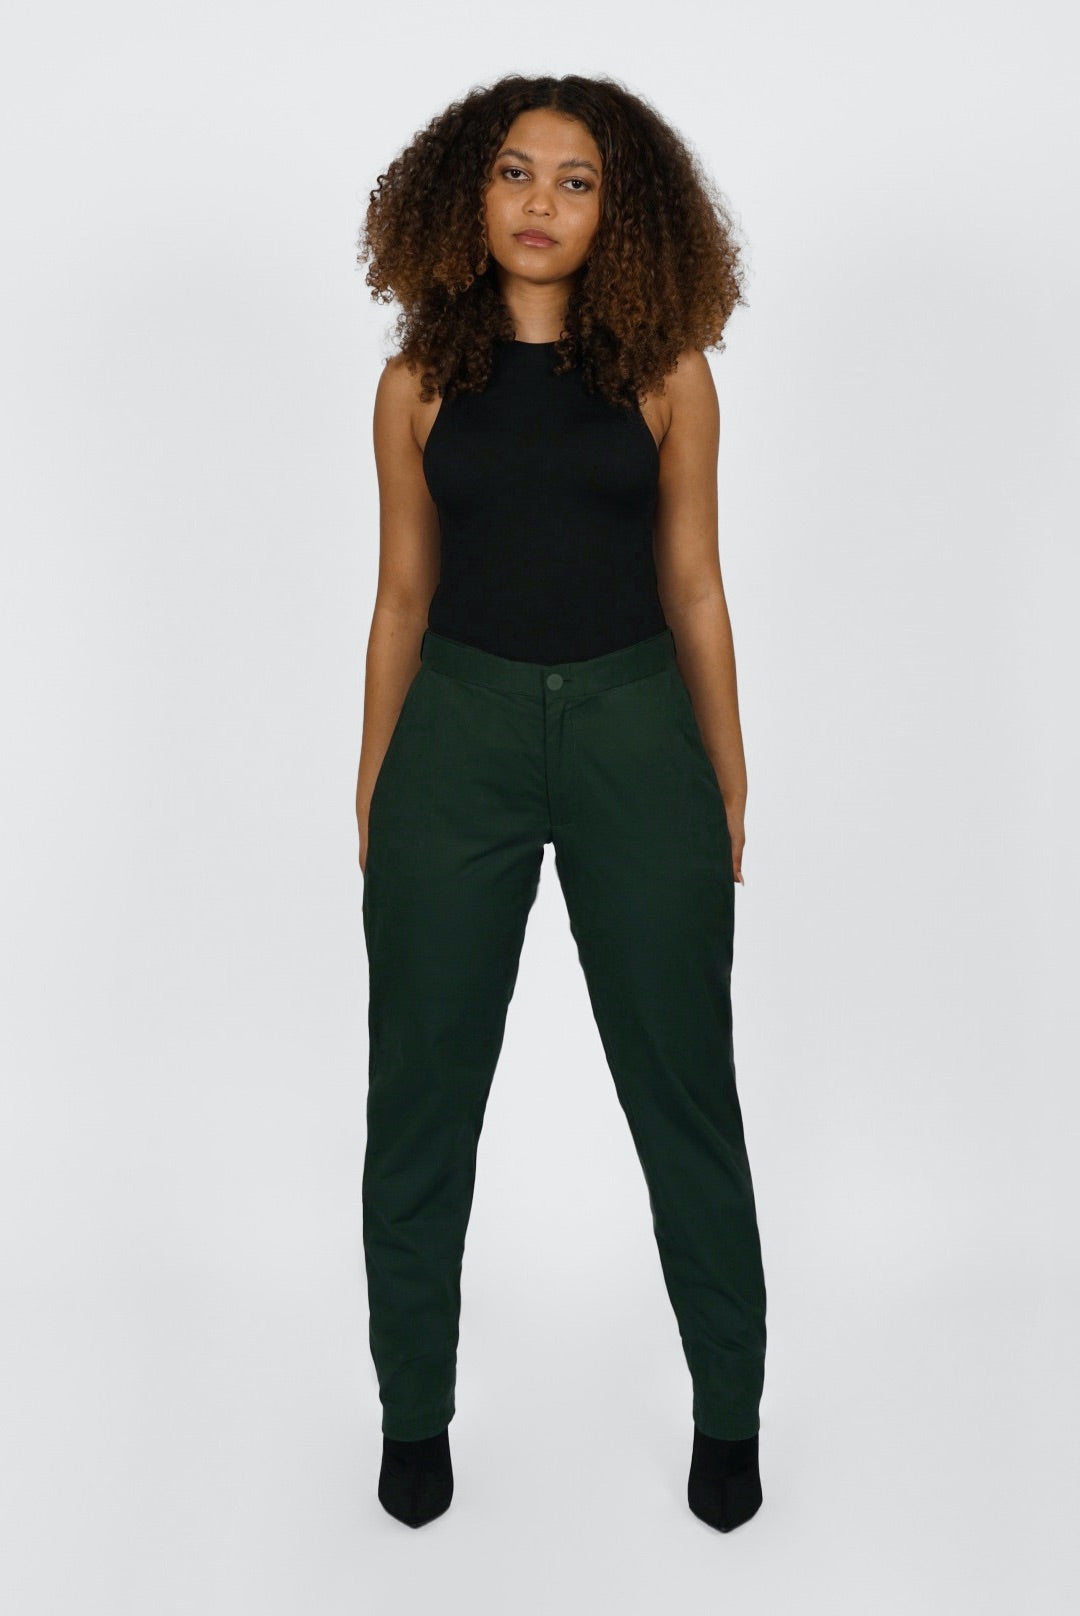 The Flex Waist Pant by Aam is a chic, cotton trouser with a hidden expandable waistband that provides 2-3" of stretch at the waist and a comfortable fit - even on your off days. It is made from a breathable, 98% organic cotton with 2% stretch and is fully machine washable. The pant also has a 4" hem which makes it easy to lengthen or cuff, as needed. The Flex Waist Pant comes in two colors - forest green (pictured here) and navy blue.